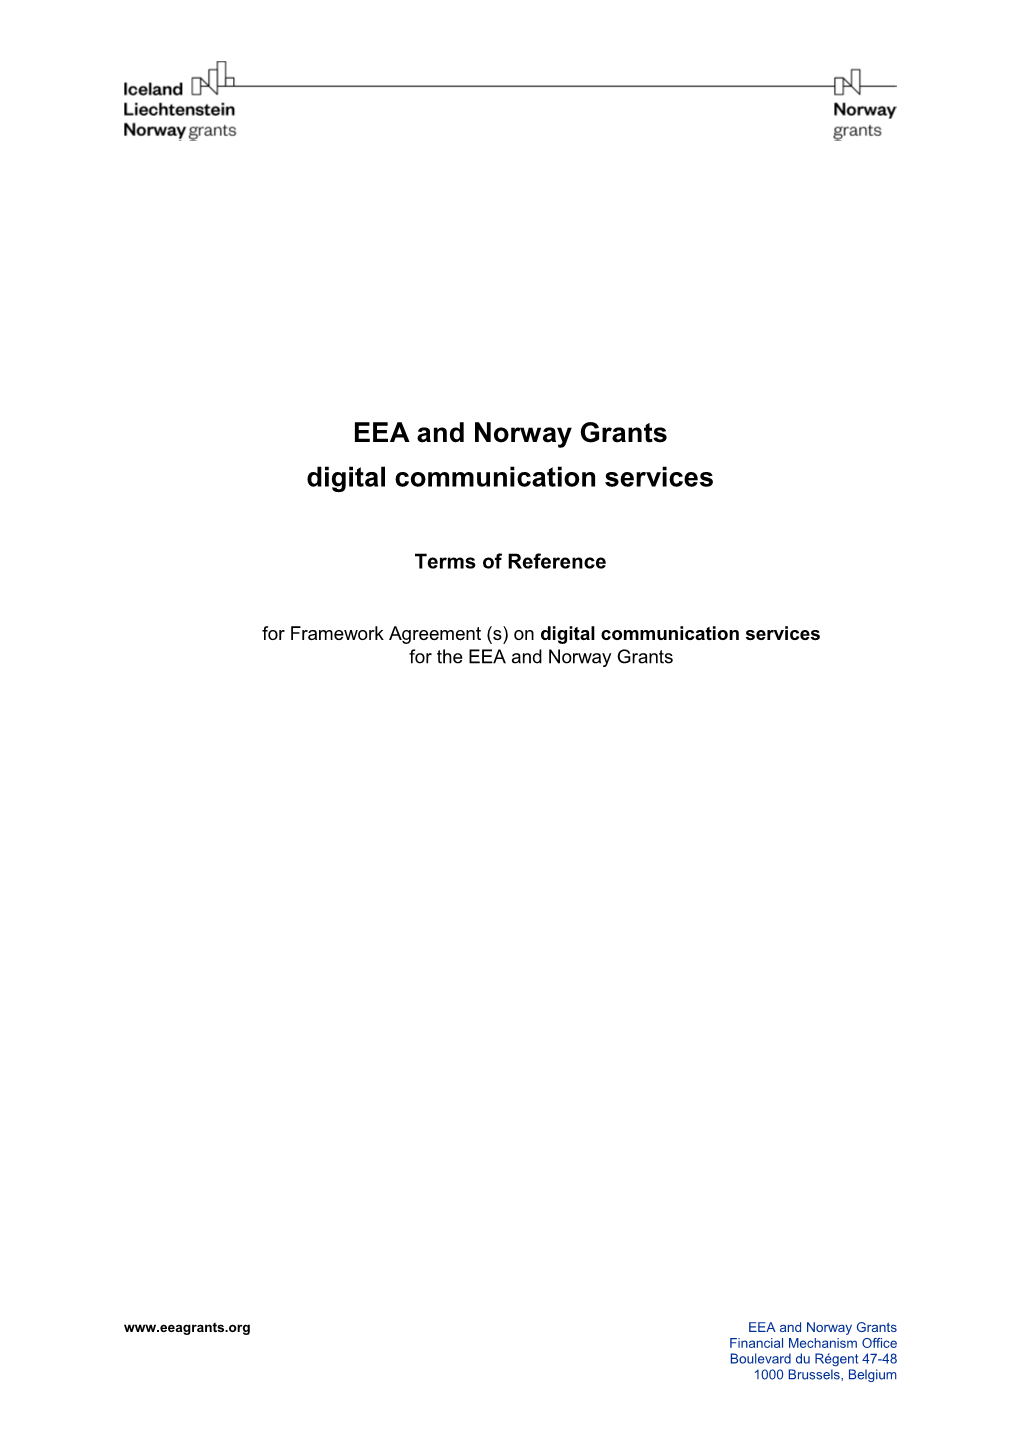 EEA and Norway Grants Digital Communication Services